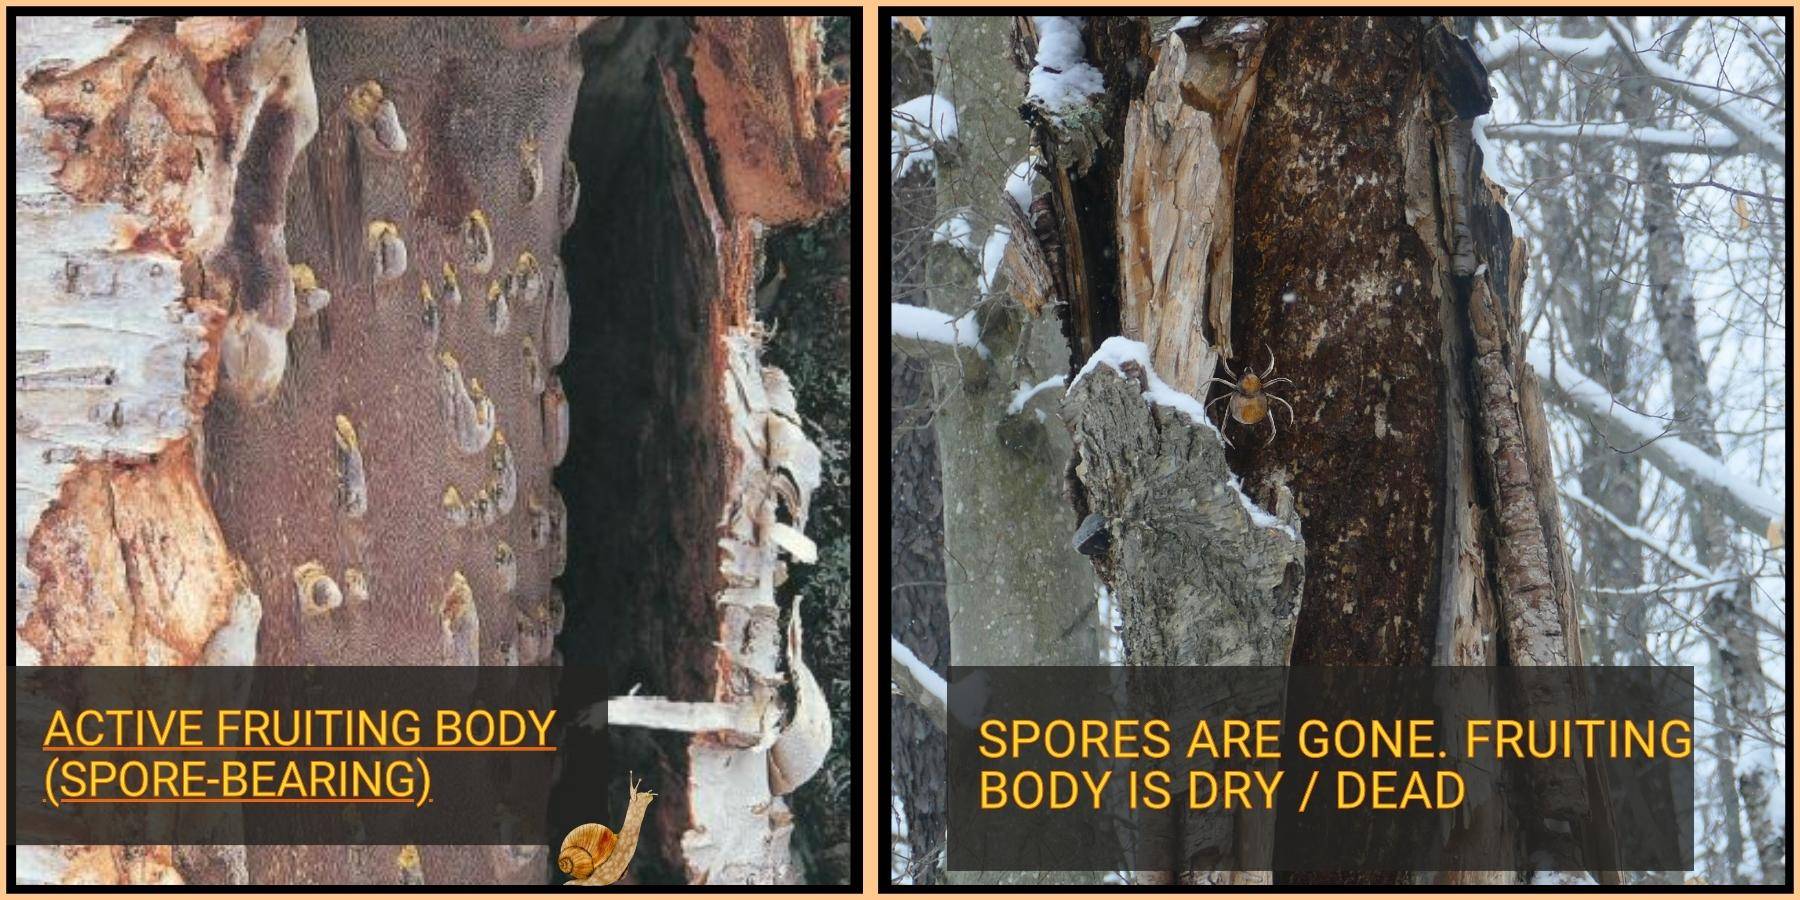 Stages of chaga fruiting body and birch tree decomposition after inonotus obliquus forms basidiocarp for spore eating insects to spread